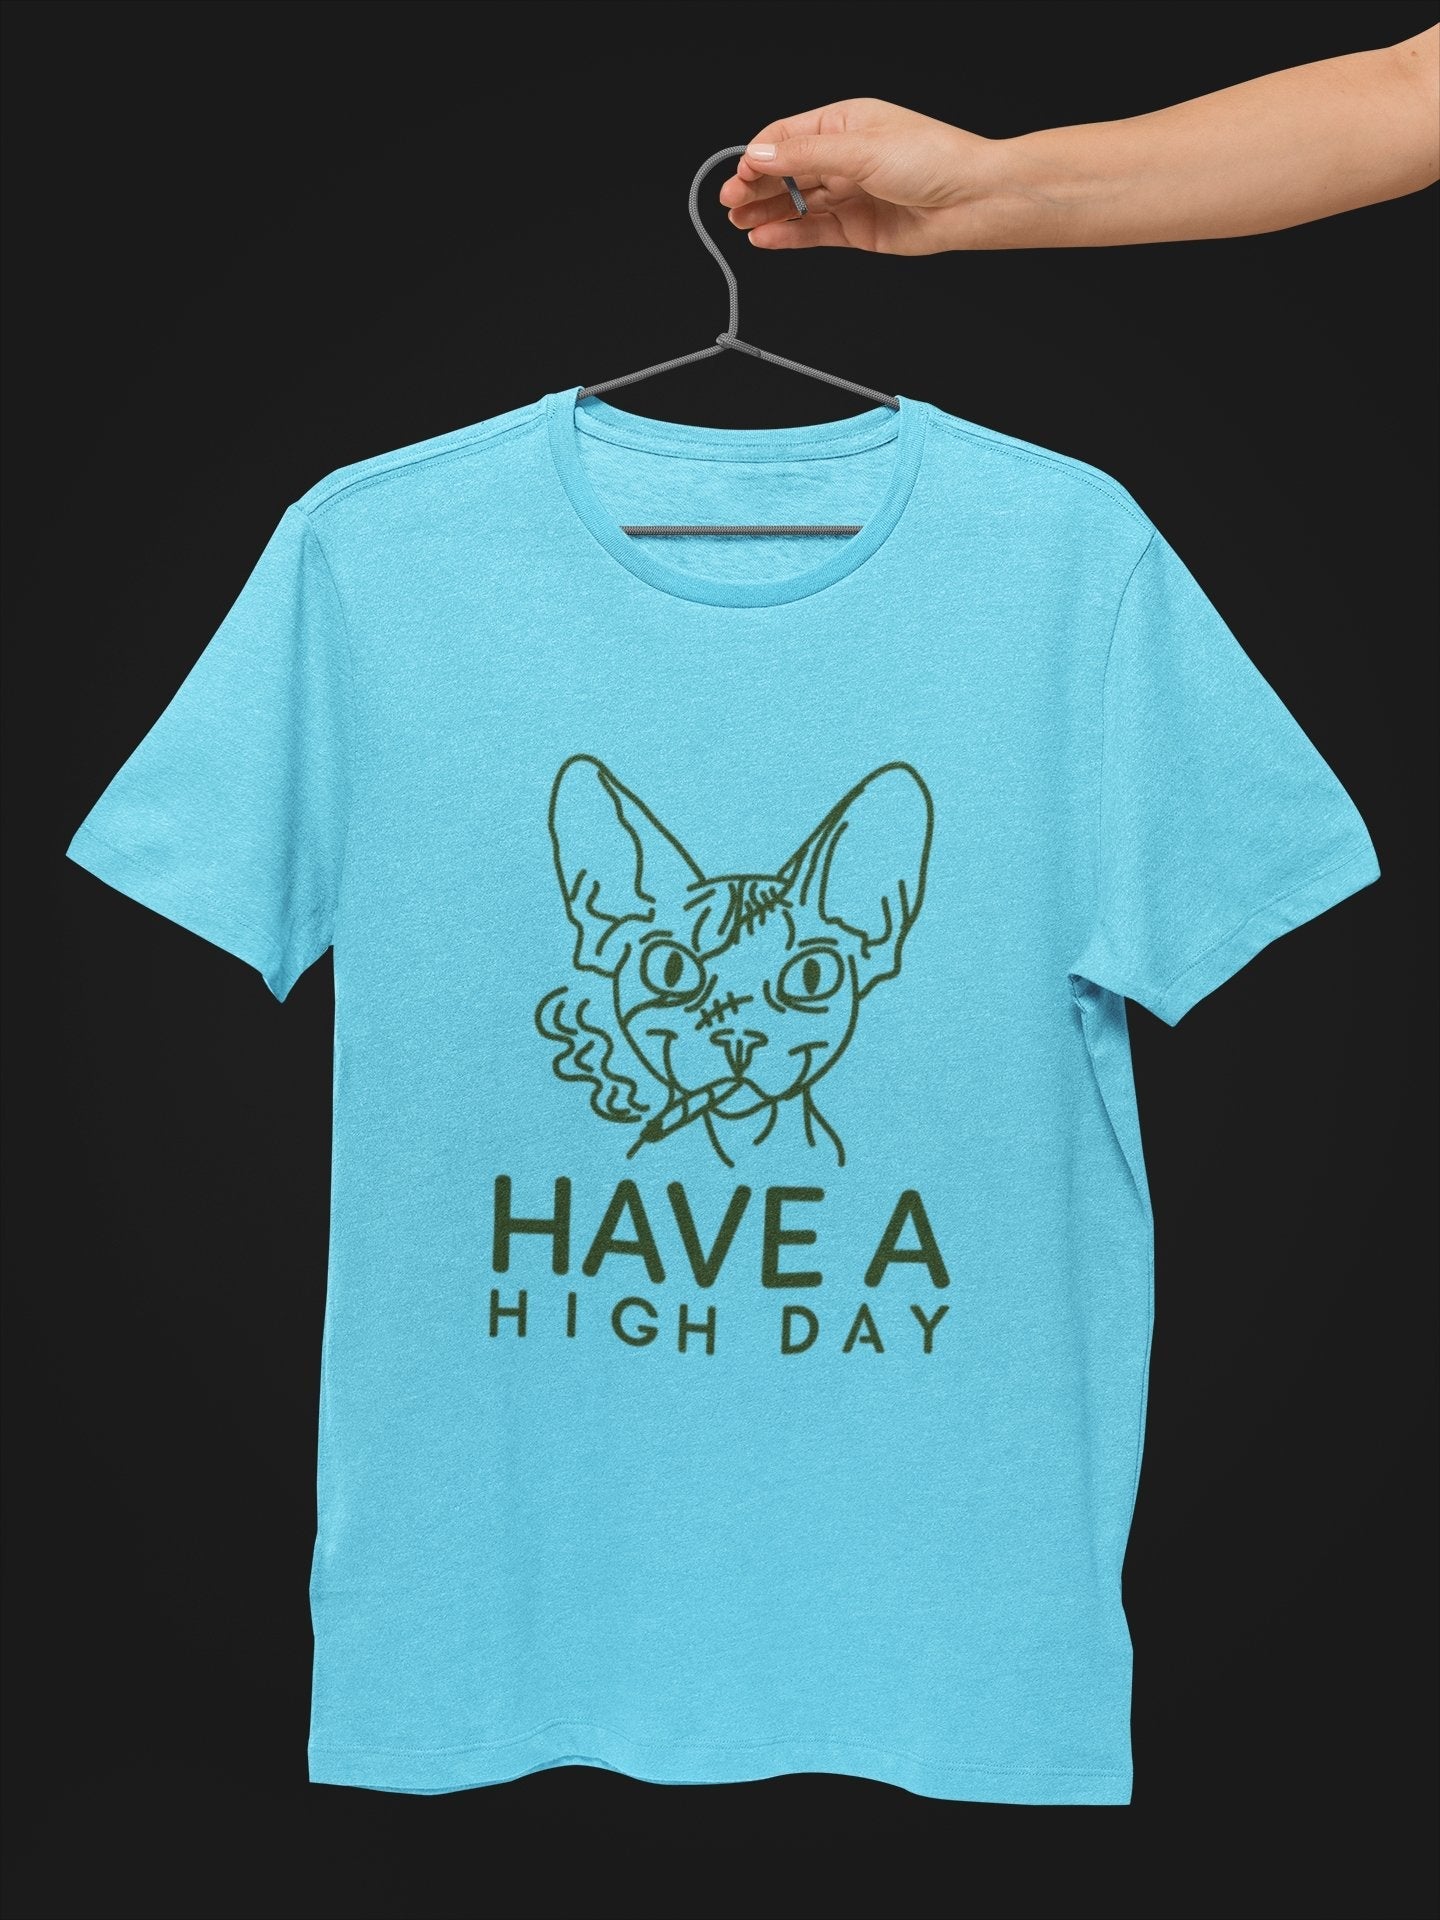 Have a High Day Stoner T shirt - Insane Tees